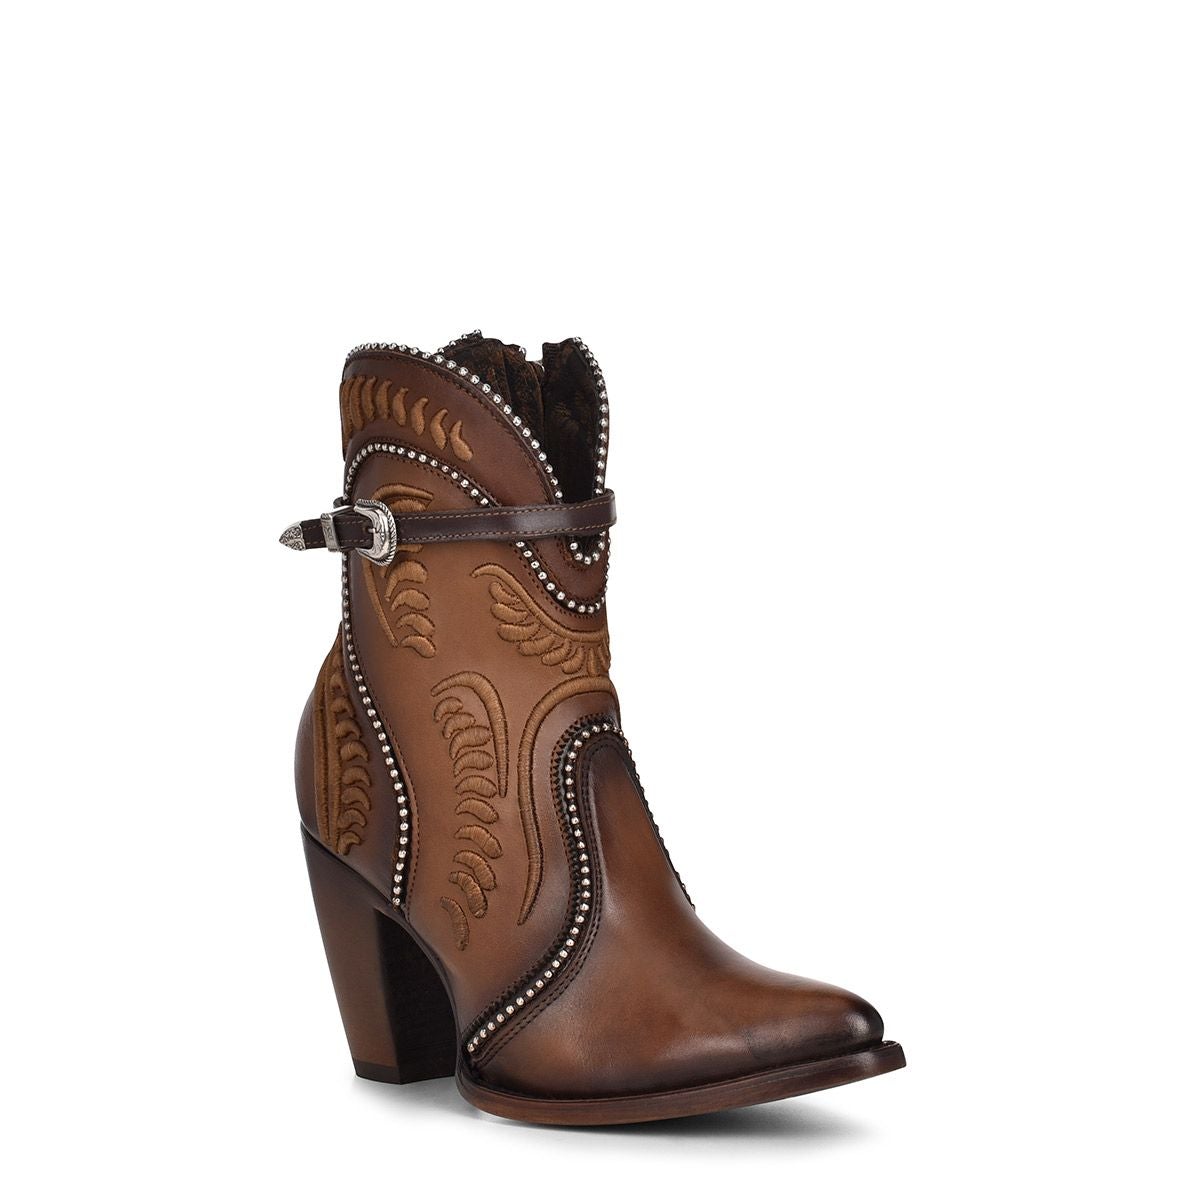 3F59RS - Cuadra brown western cowgirl cowhide leather dress ankle boots women-Kuet.us